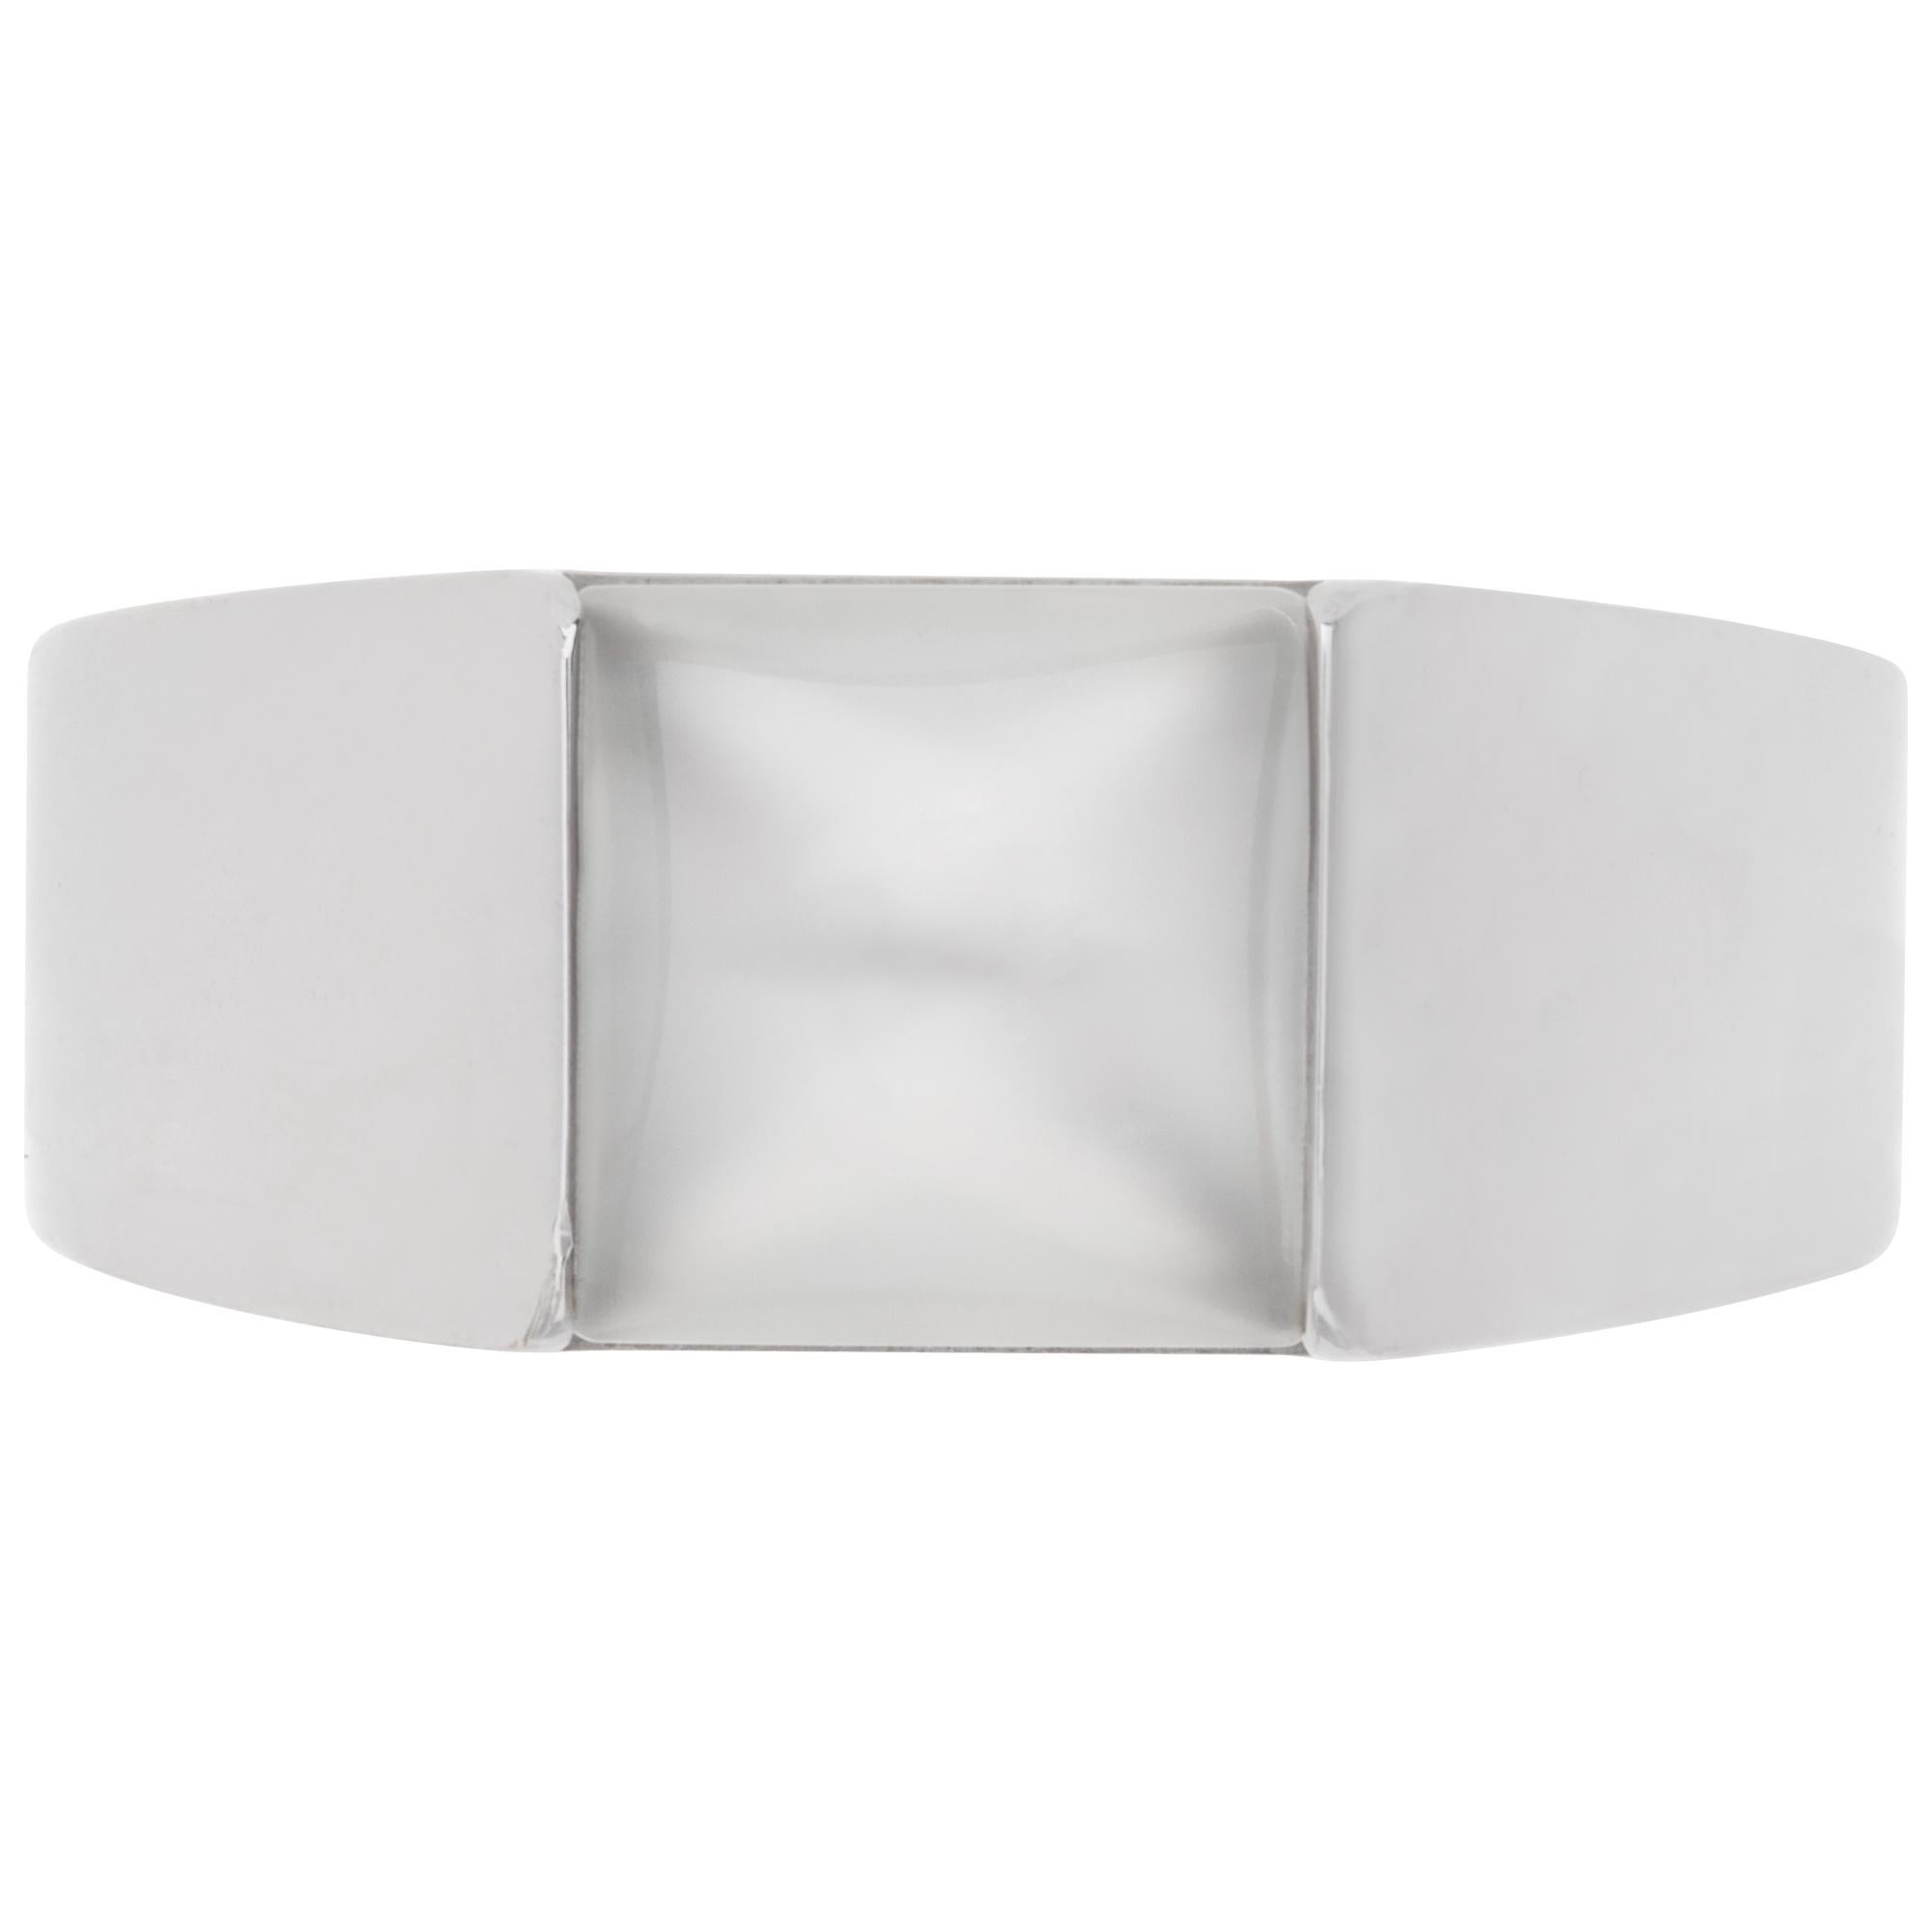 Cartier Tank ring in 18k white gold with moonstone. Size 5.5This Cartier ring is currently size 5.5 and some items can be sized up or down, please ask! It weighs 8.1 gramms and is 18k.